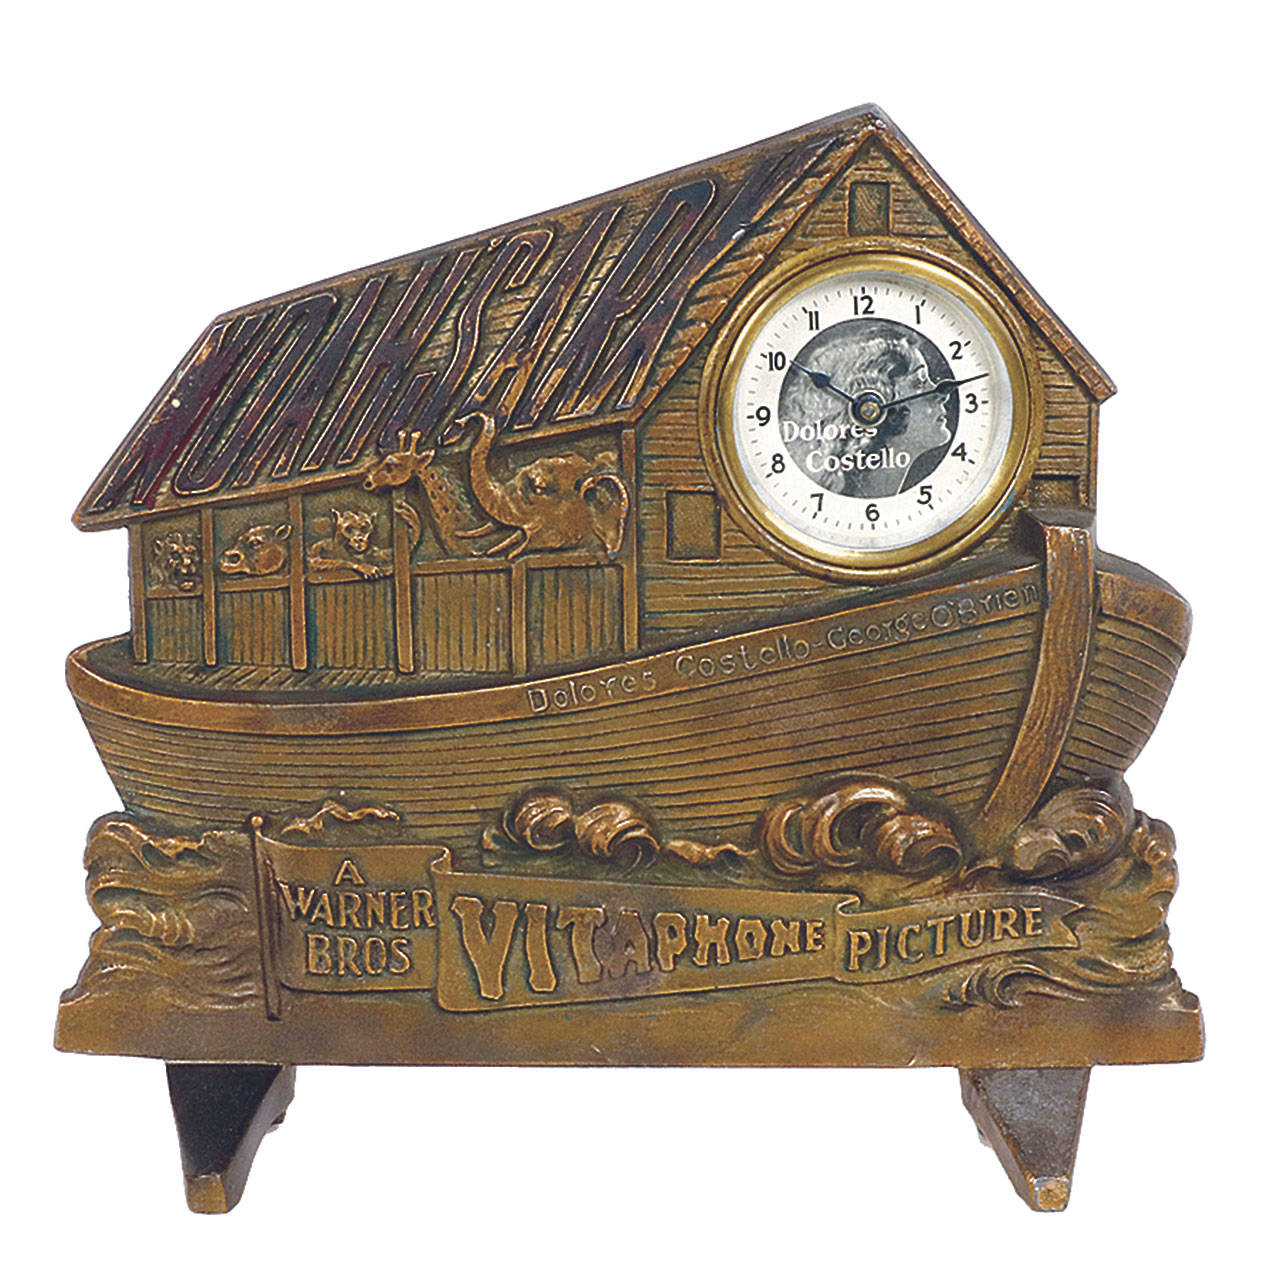 Ever see a movie clock before? This unusual apparatus made in 1928 sold for $855. It was used for publicity for the movie “Noah’s Ark,” a Warner Brothers picture with Dolores Costello and George O’Brien — long forgotten movie stars. (Cowles Syndicate Inc.)